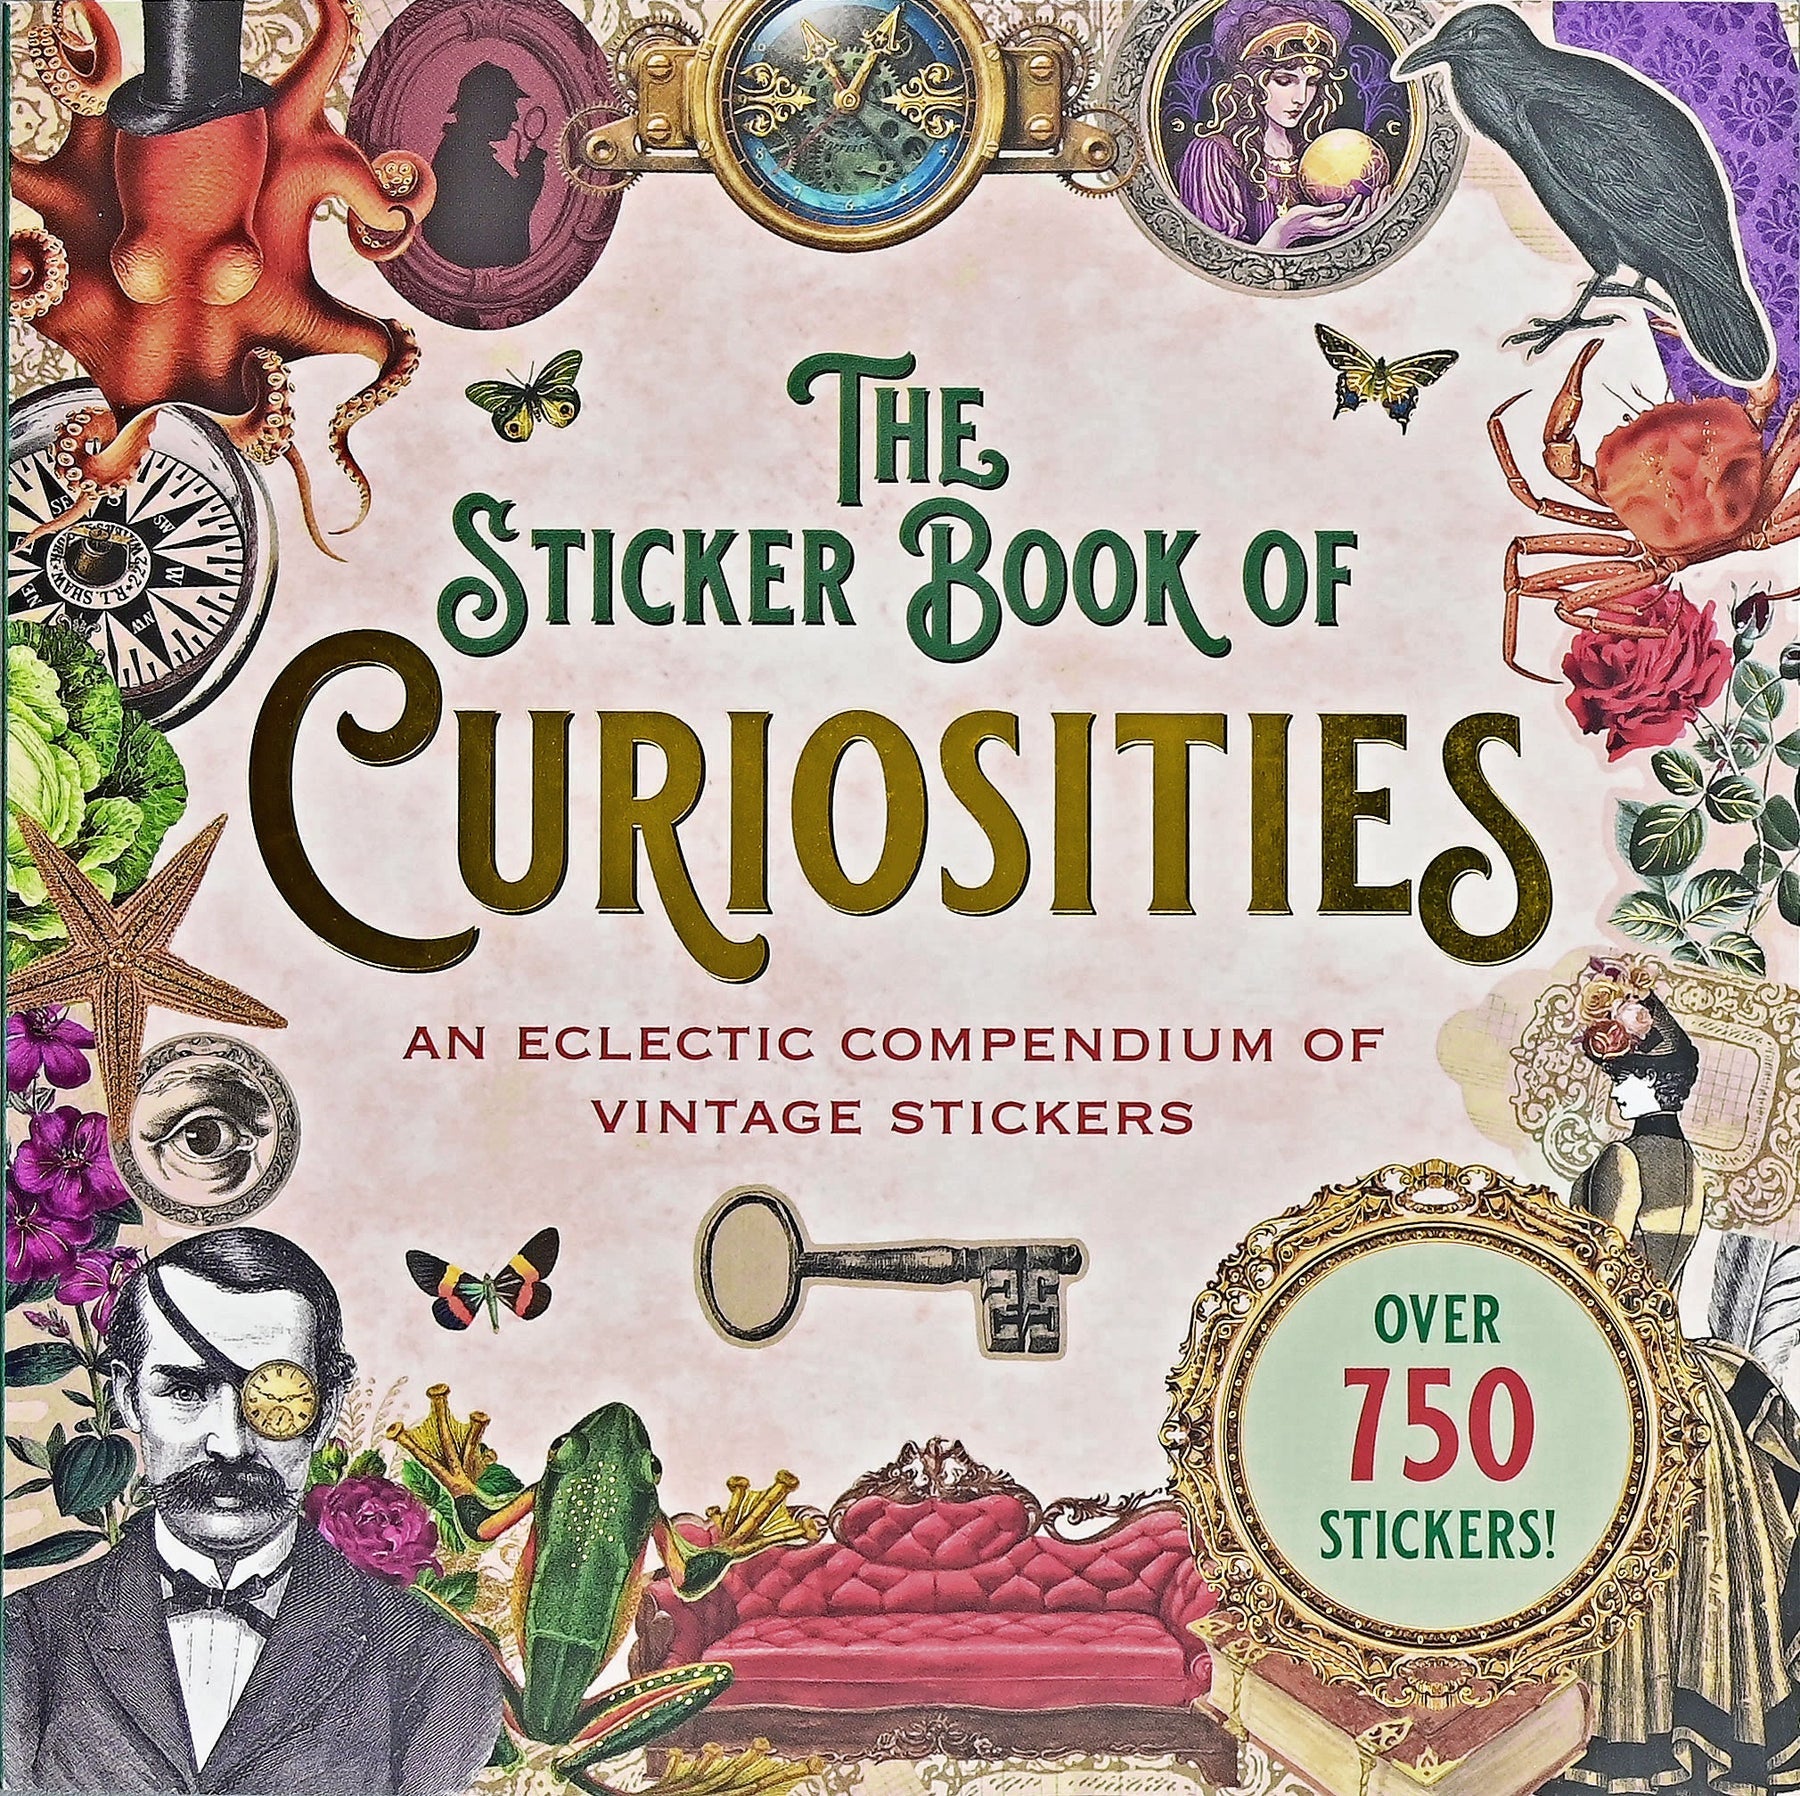 The Sticker Book of Curiosities: An Eclectic Compendium of Vintage Stickers (Over 750 Stickers!)